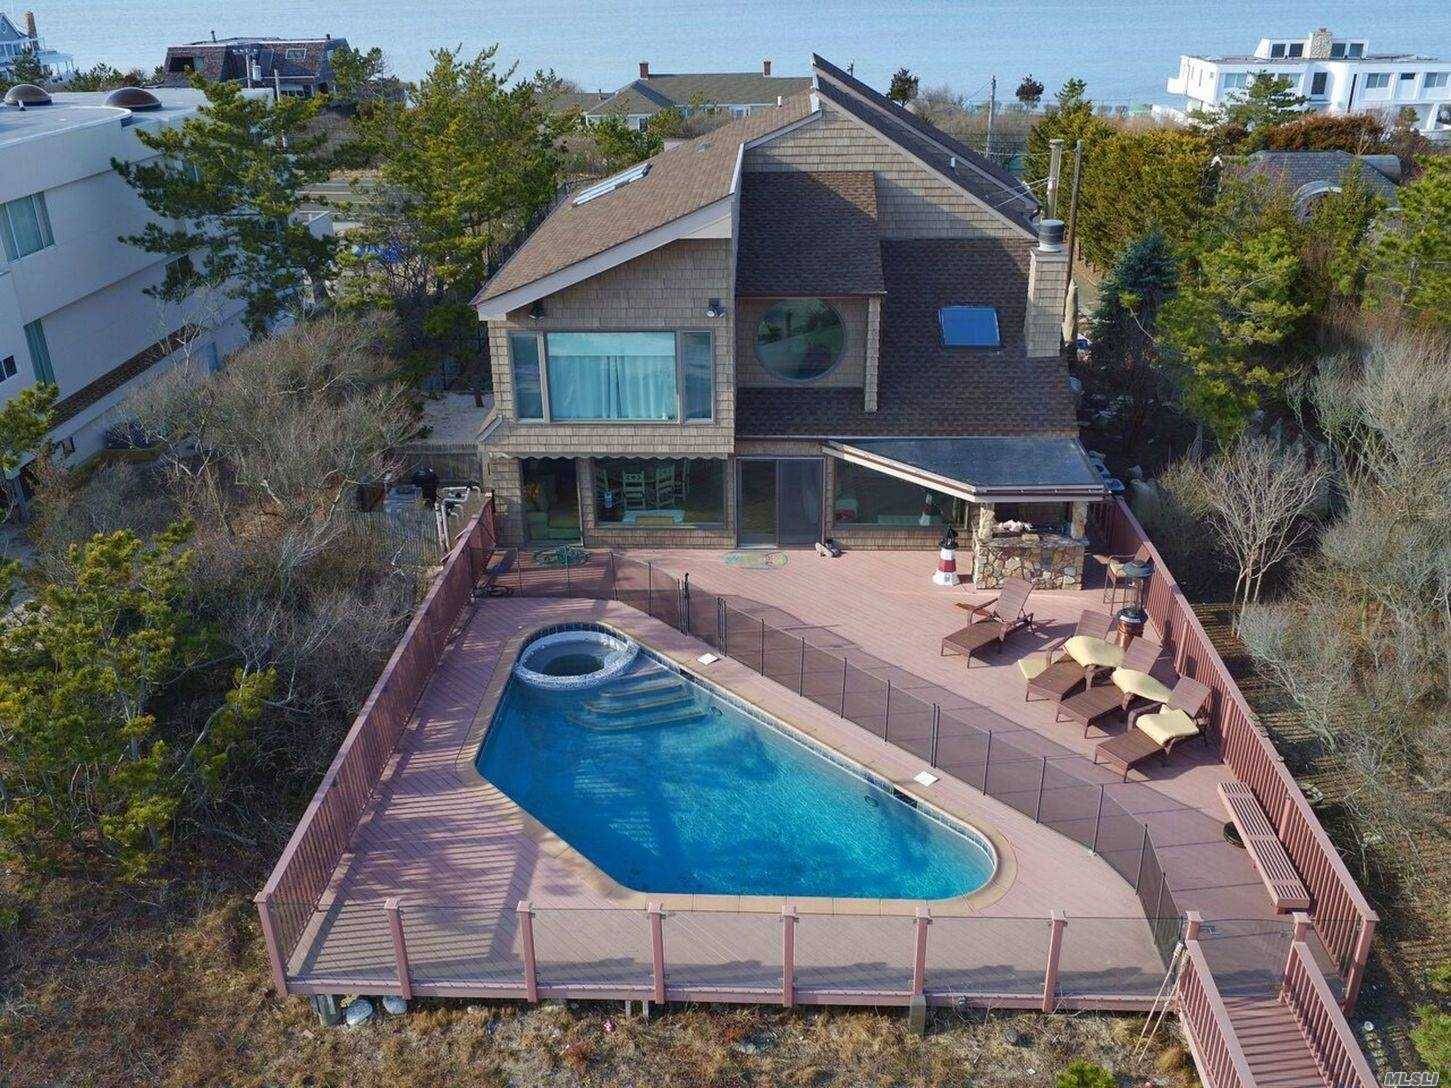 Rare Find, Exceptional 5 Br, 4 Ba, Contemporary Oceanfront Home With Oceanside Pool, Outside Bar, Hot Tub amp ; Har Tru Tennis.